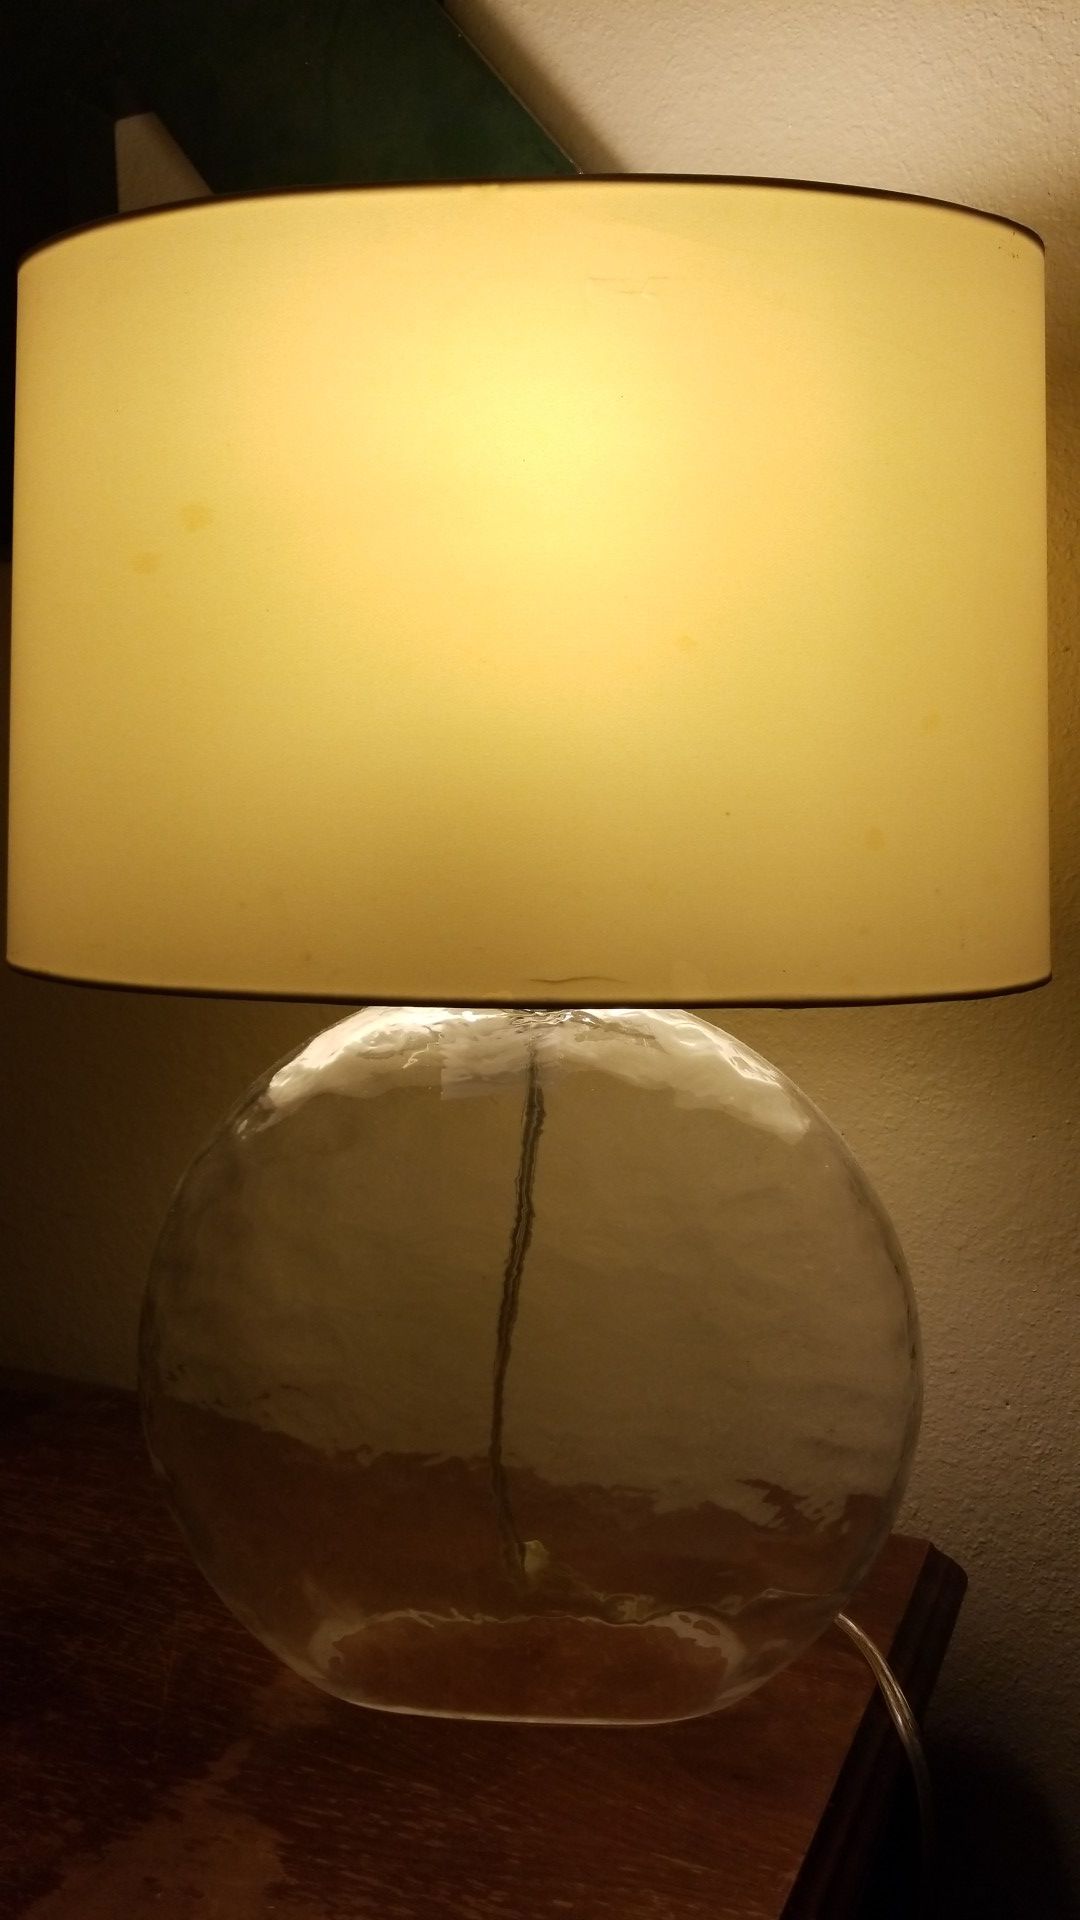 Hollow glass lamp with cream colored shade